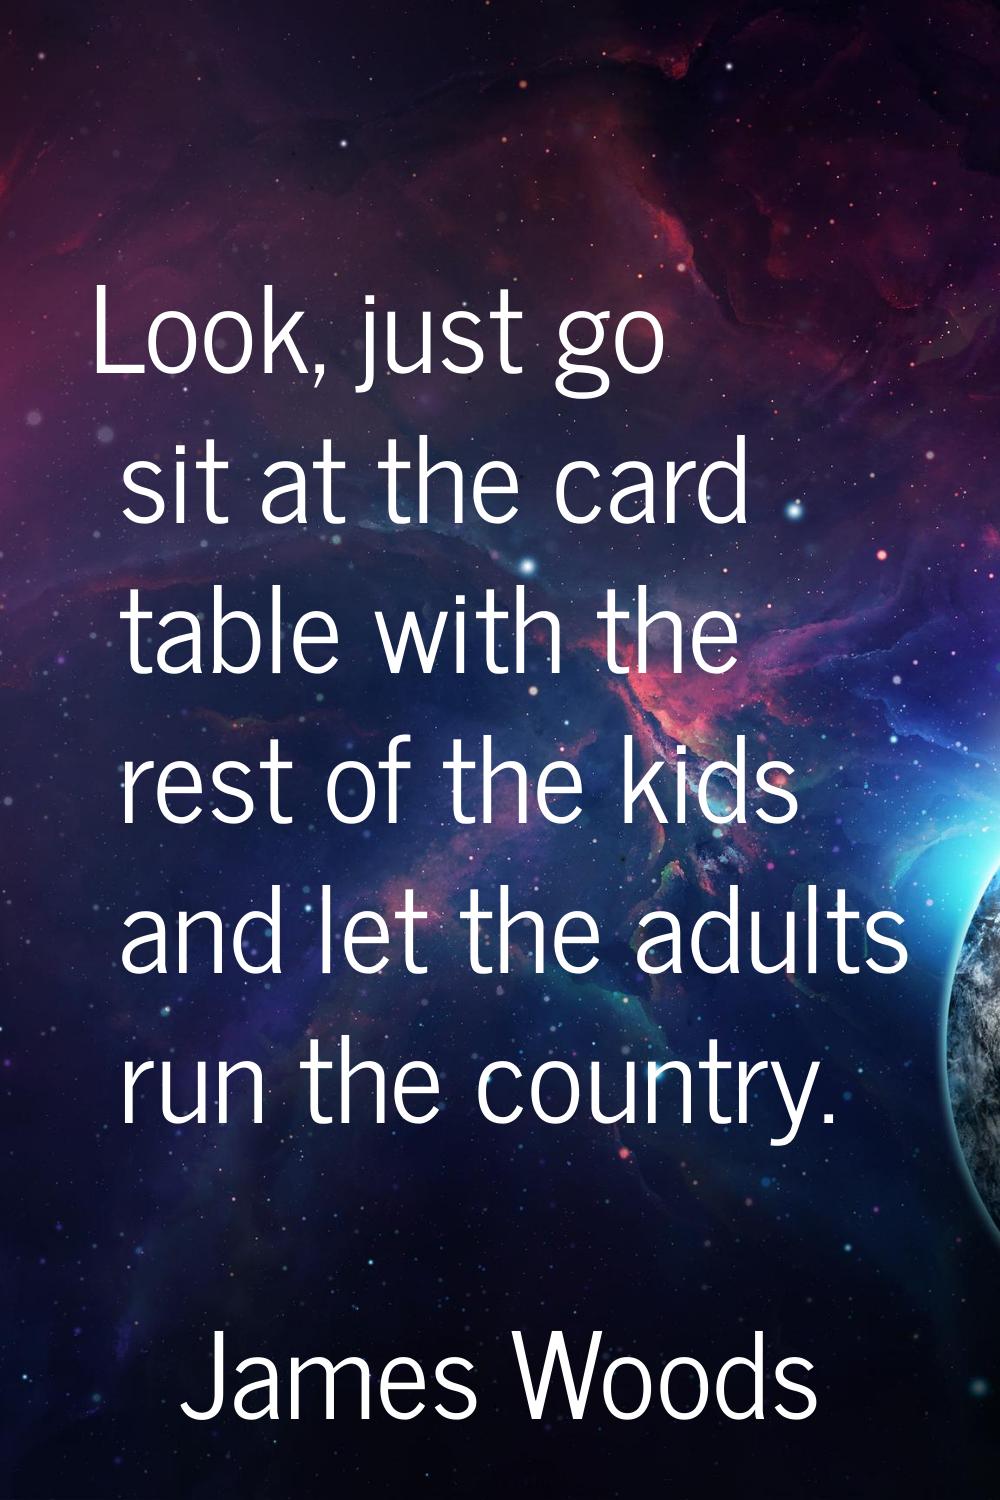 Look, just go sit at the card table with the rest of the kids and let the adults run the country.